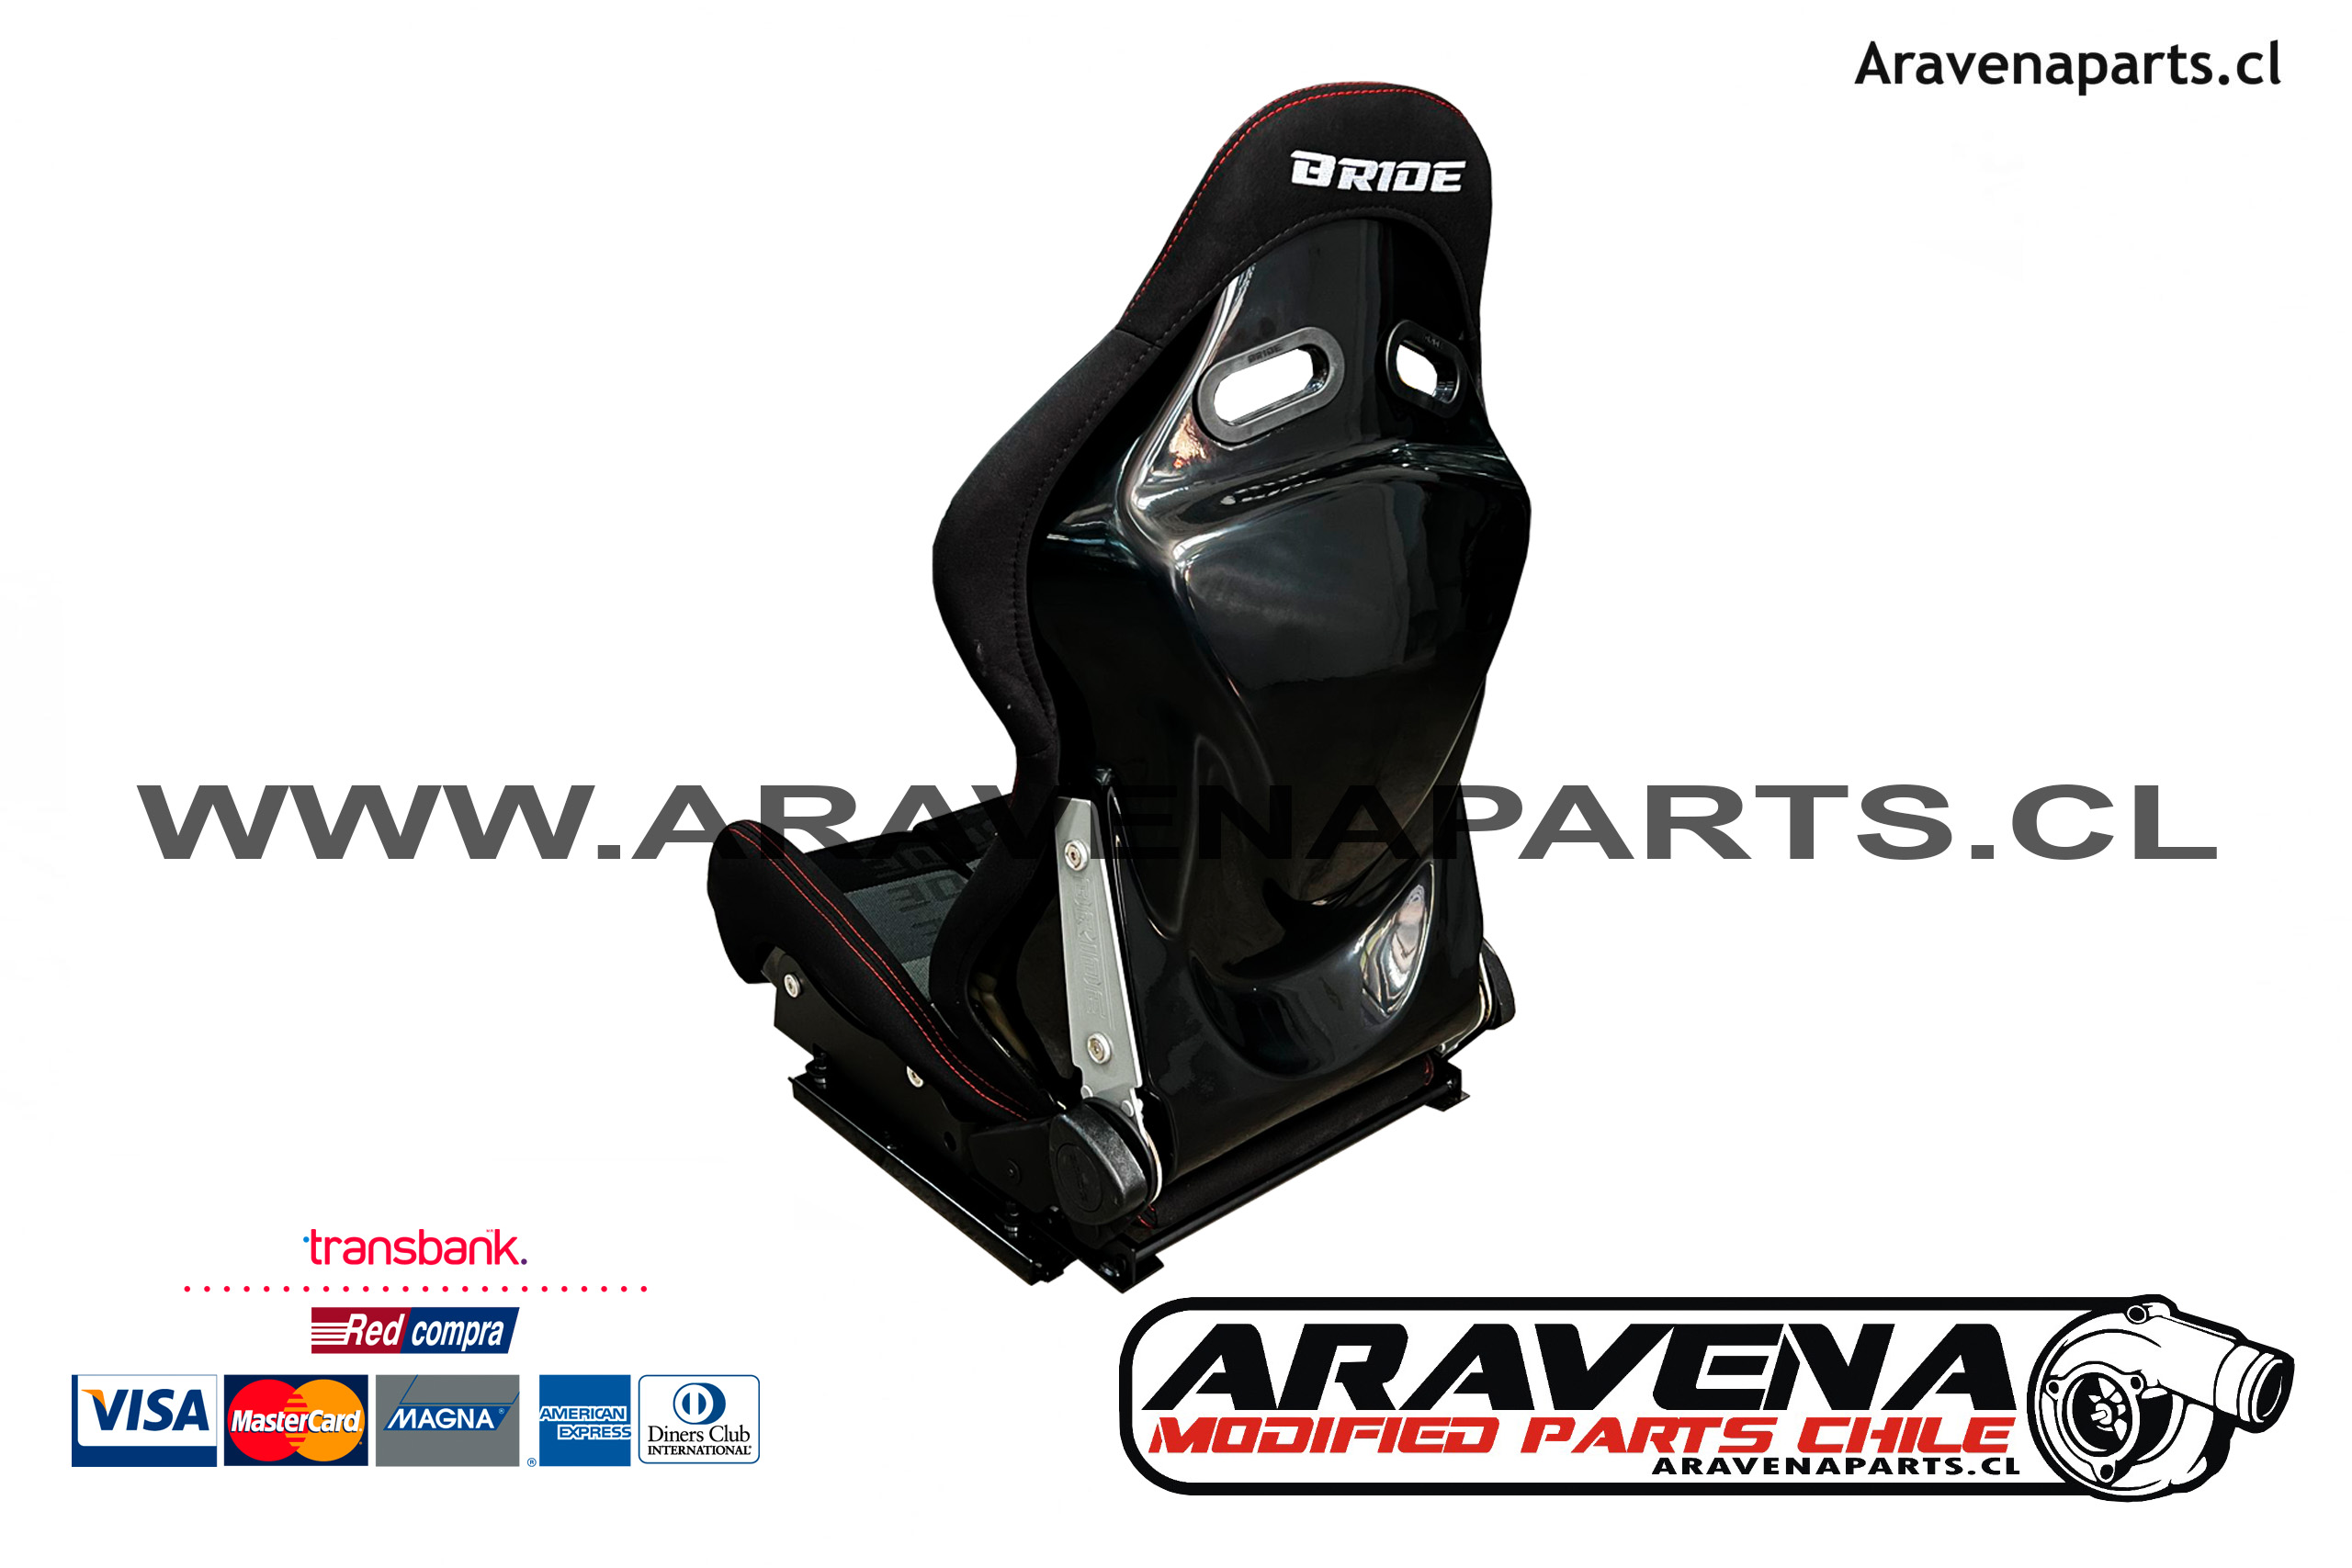 BUTACA RECLINABLE DEPORTIVA BRIDE LOW MAX BRIDE ARAVENA PARTS BUTACA FIJA BUTACA DEPORTIVA BUTACAS BRIDE SPARCO OMP FIJA RECLINABLE REAXION ARAVENA PARTS CHILE